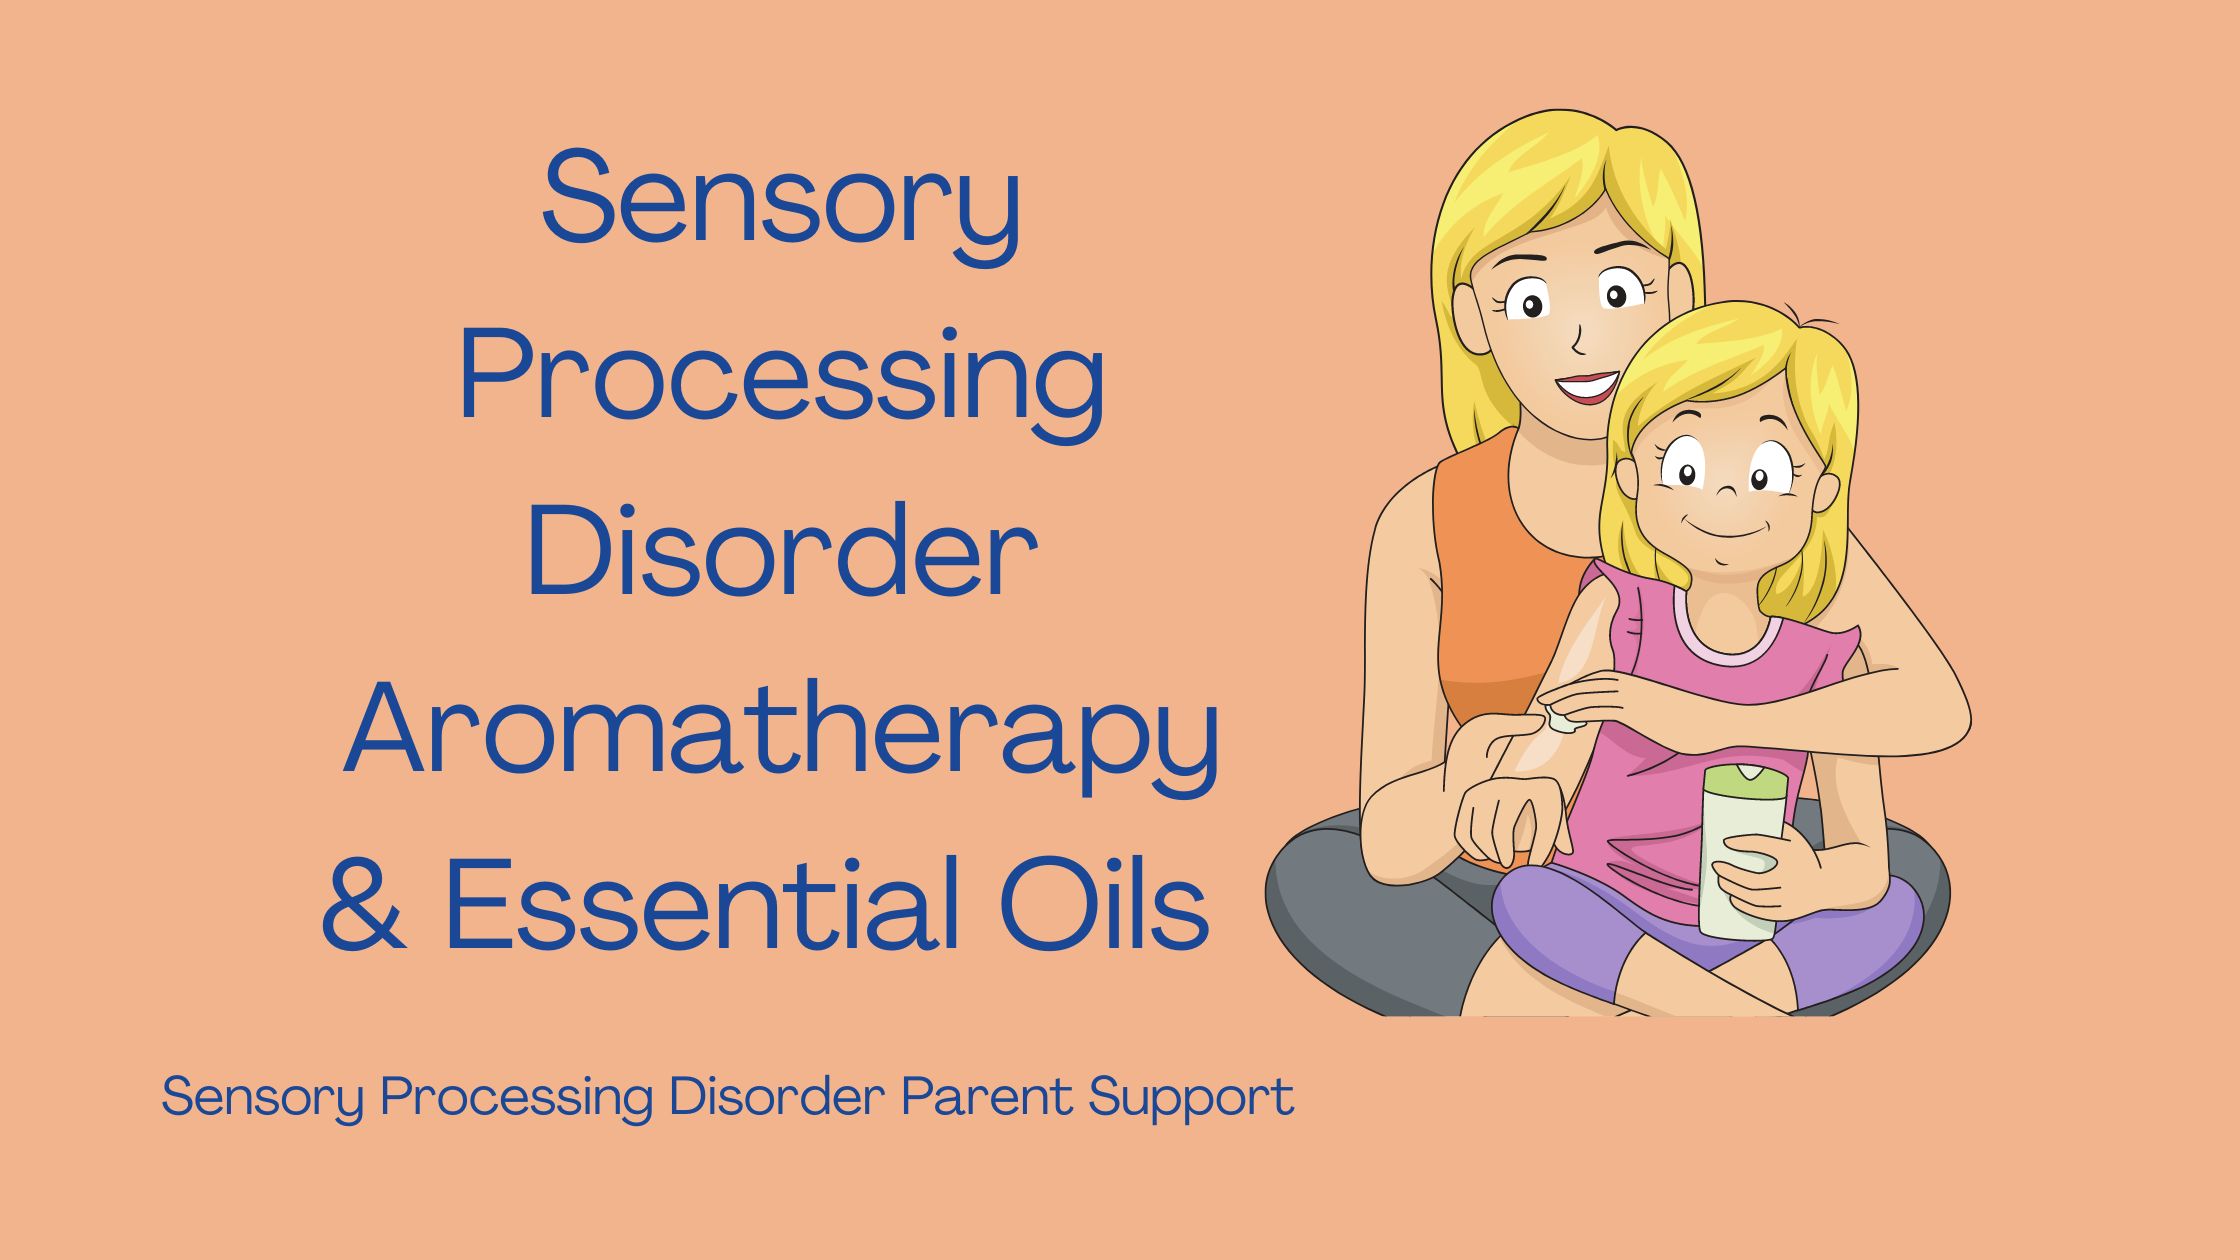 parent putting essential oils on child with lotion Sensory Processing Disorder Aromatherapy & Essential Oils